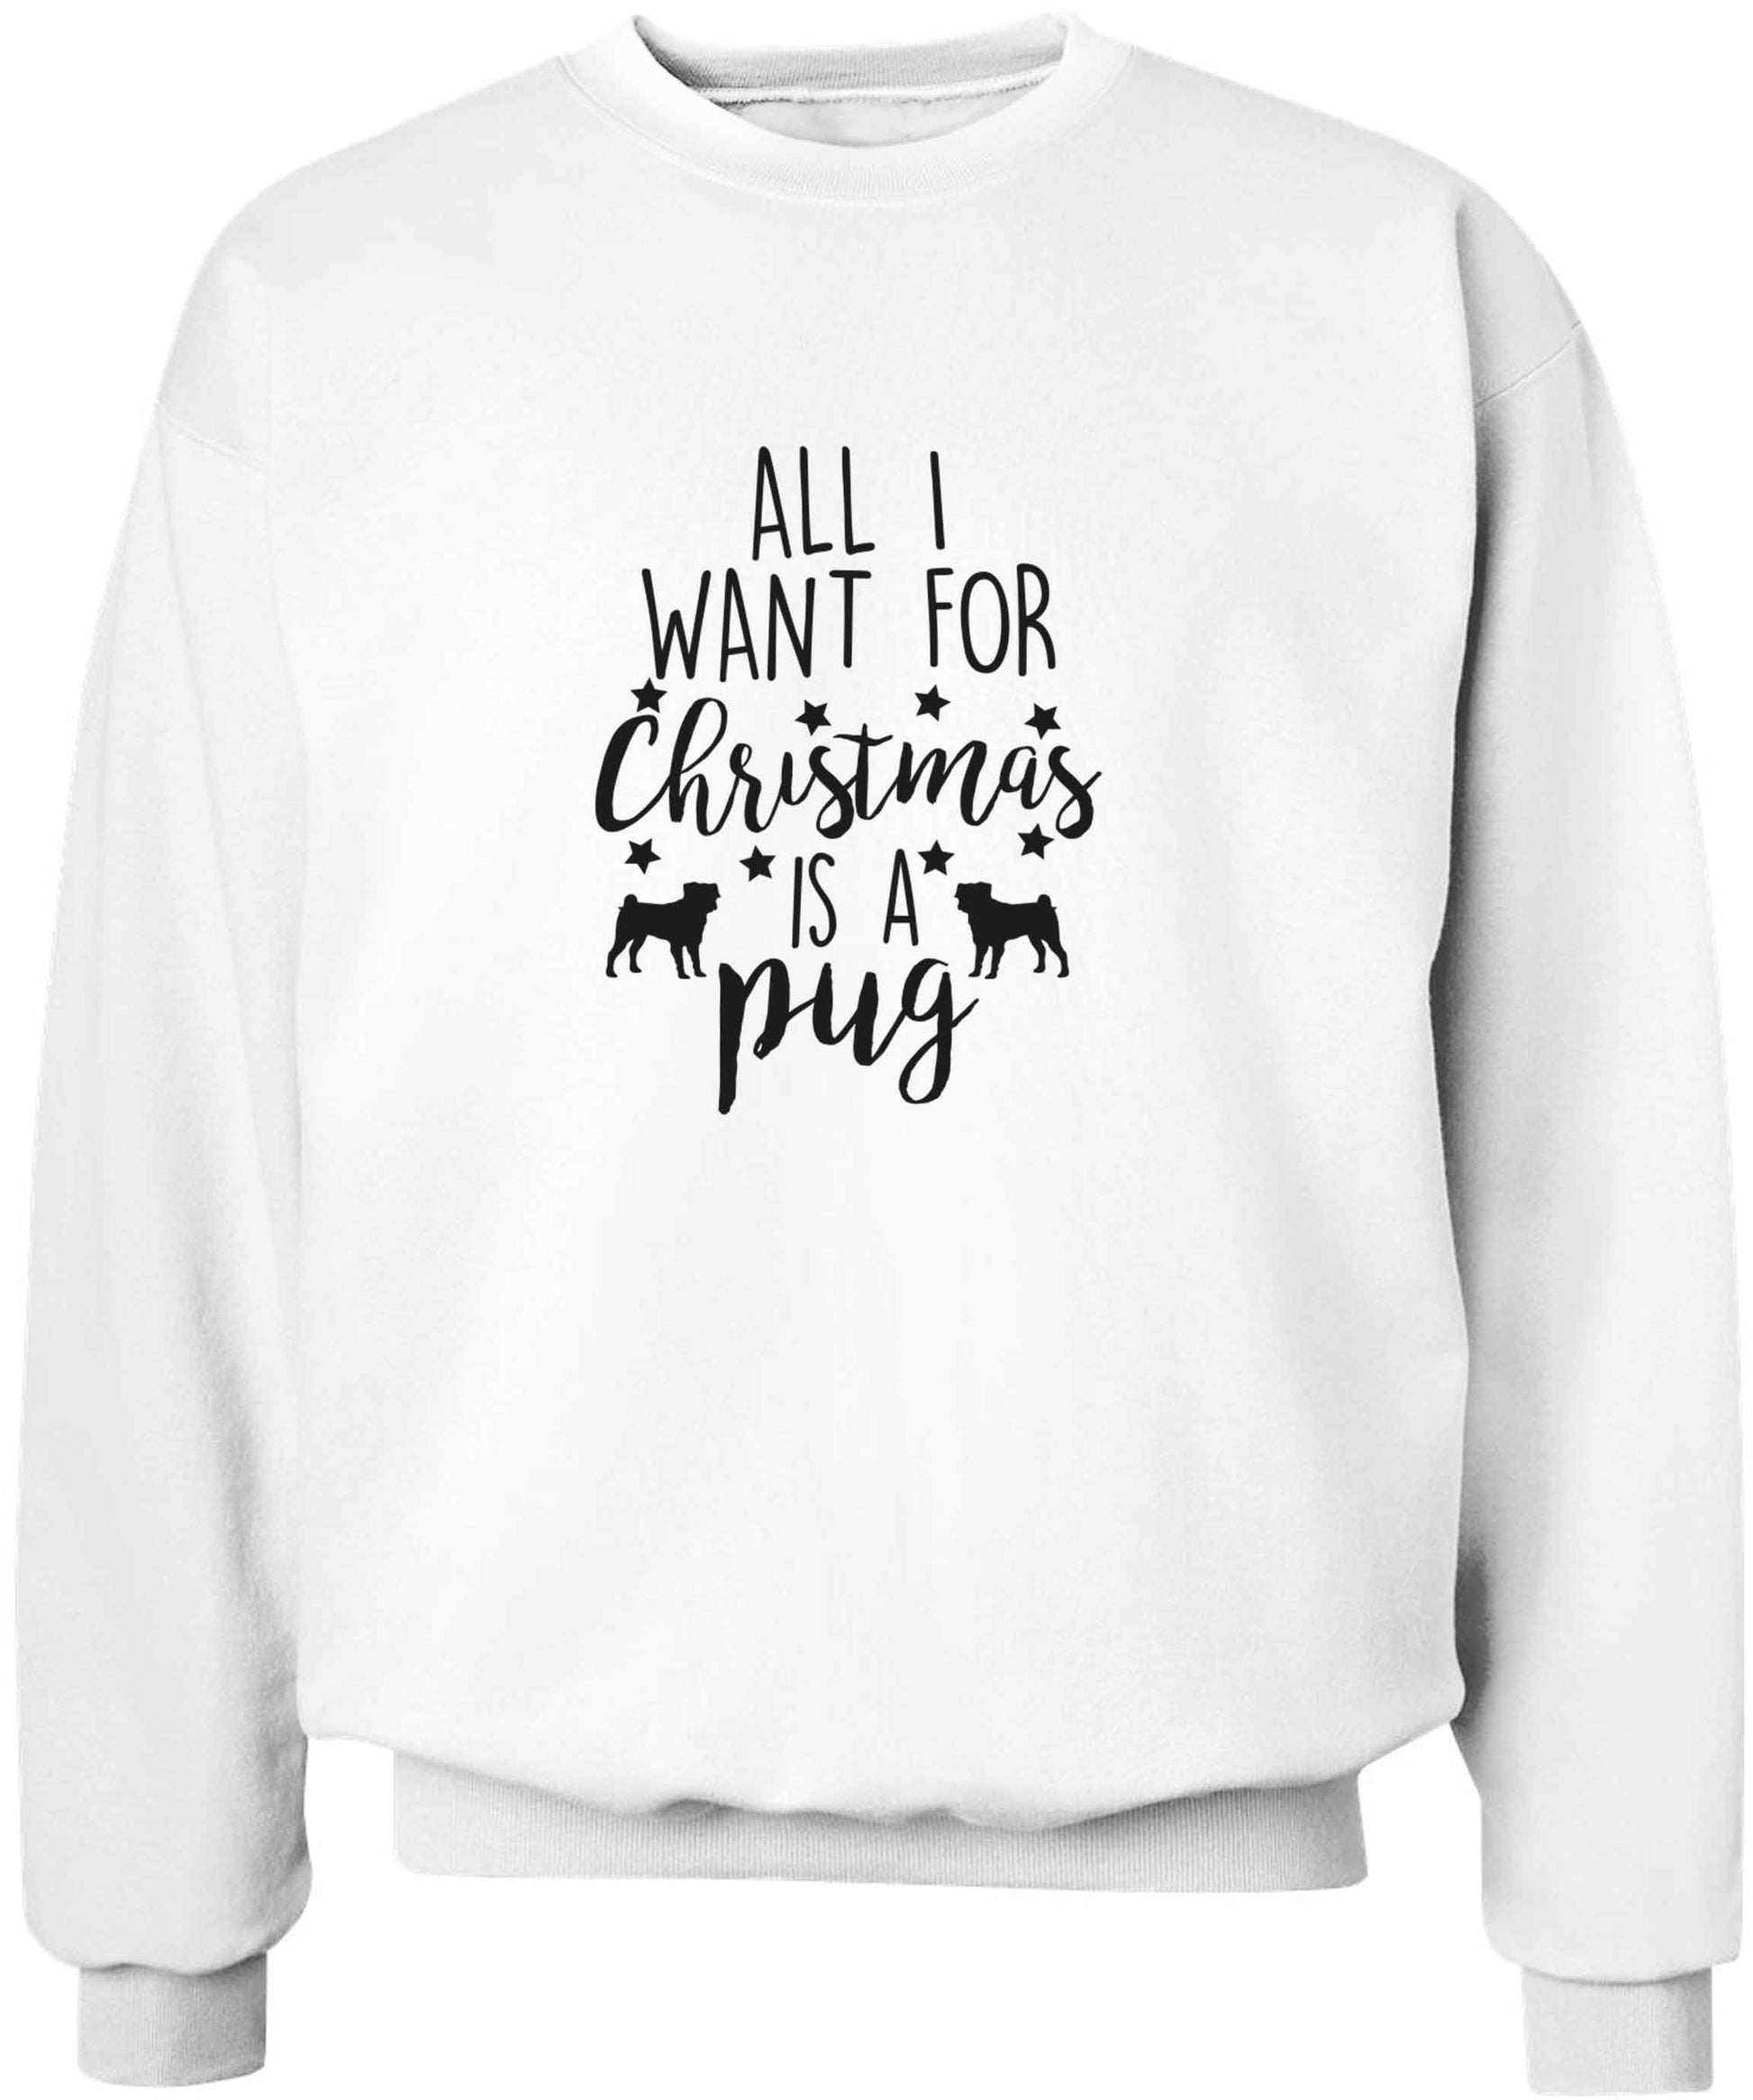 All I want for Christmas is a pug adult's unisex white sweater 2XL